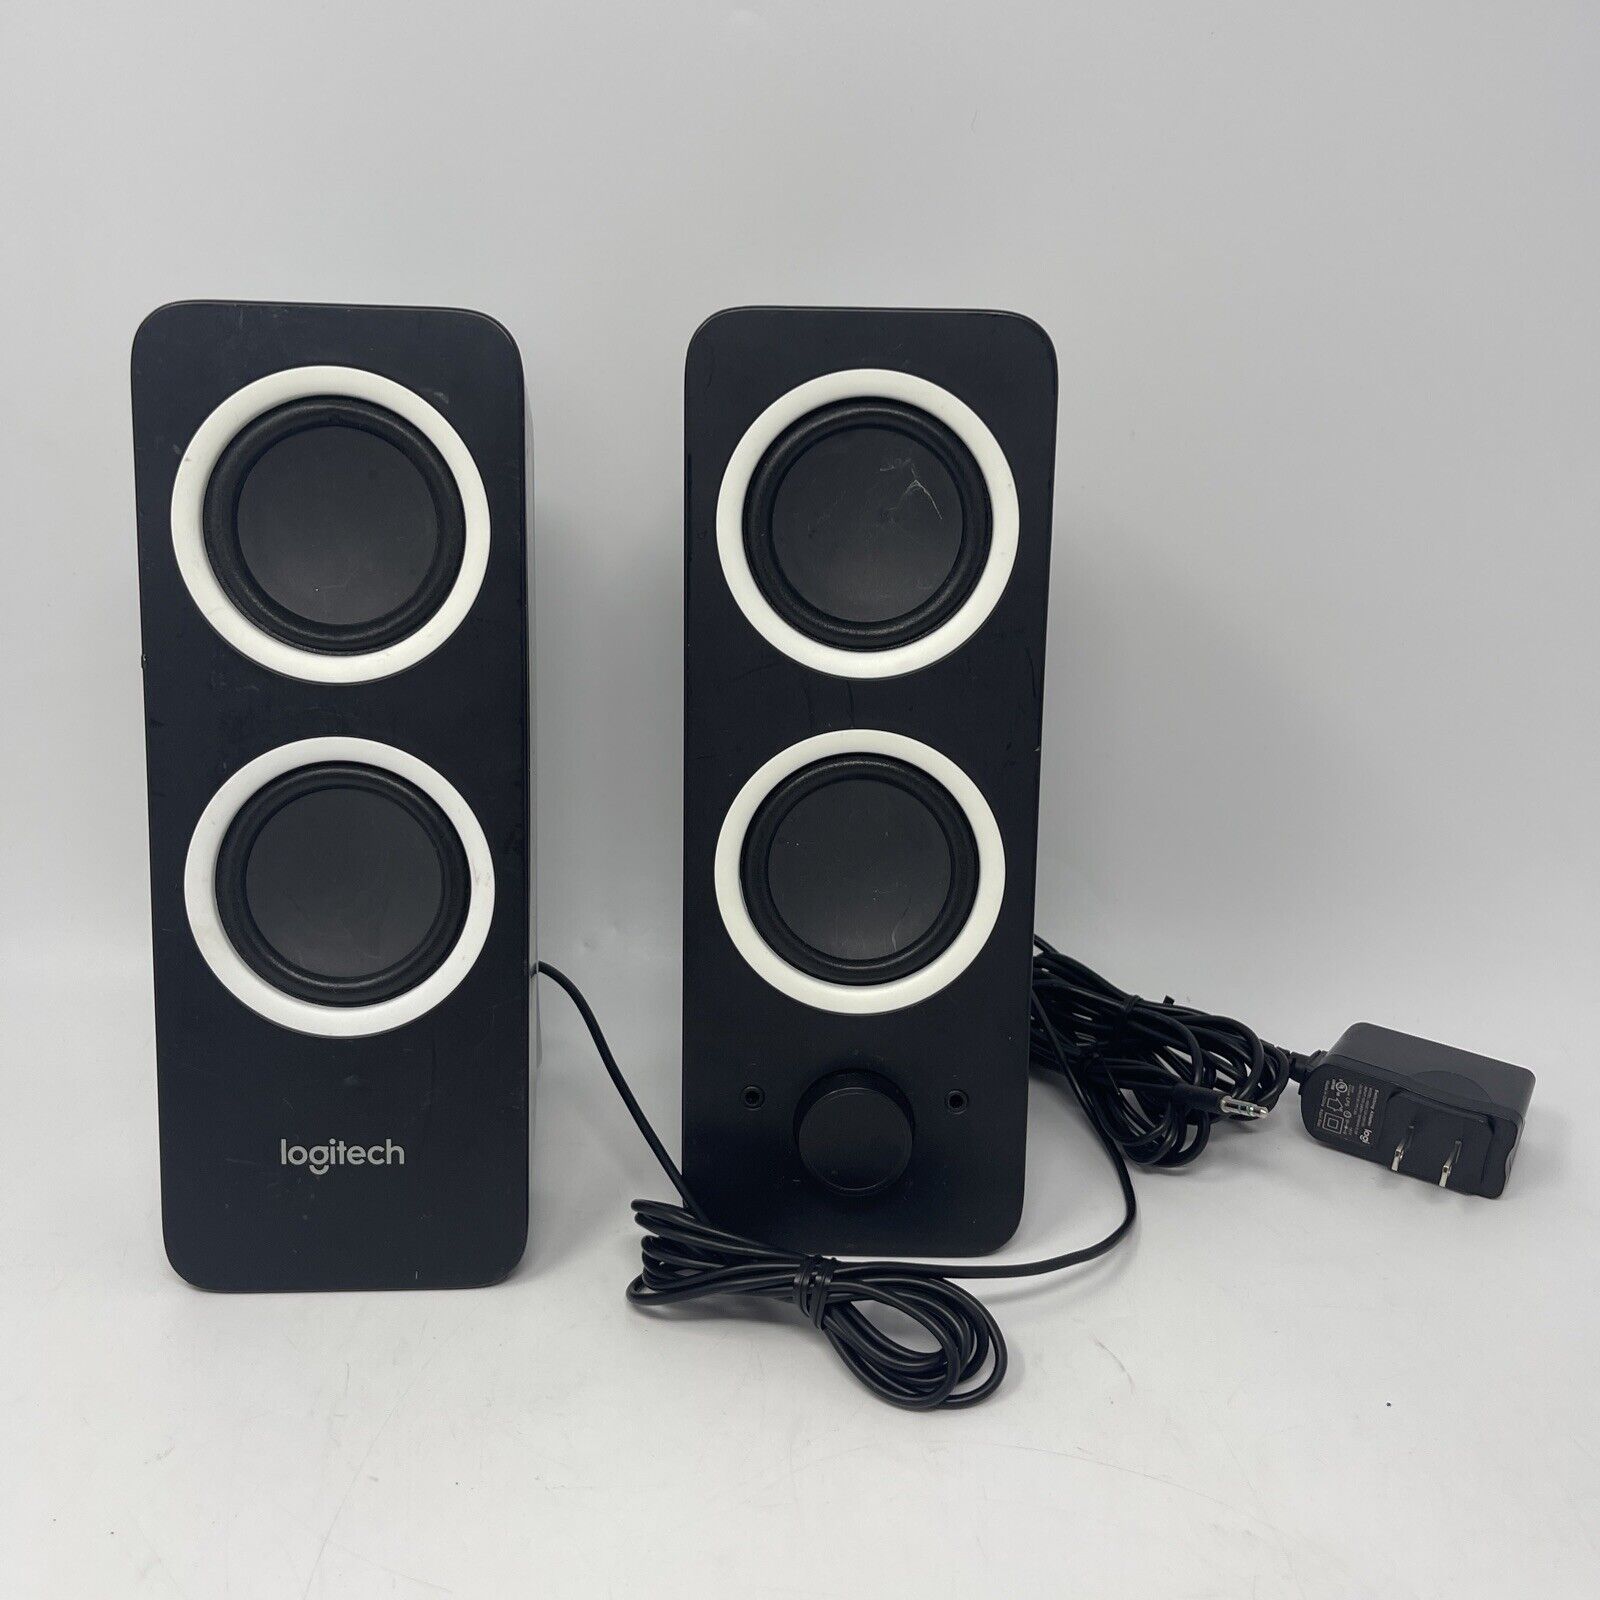 Logitech Z200 10W Multimedia Speakers, Pair - Black Complete With Cables